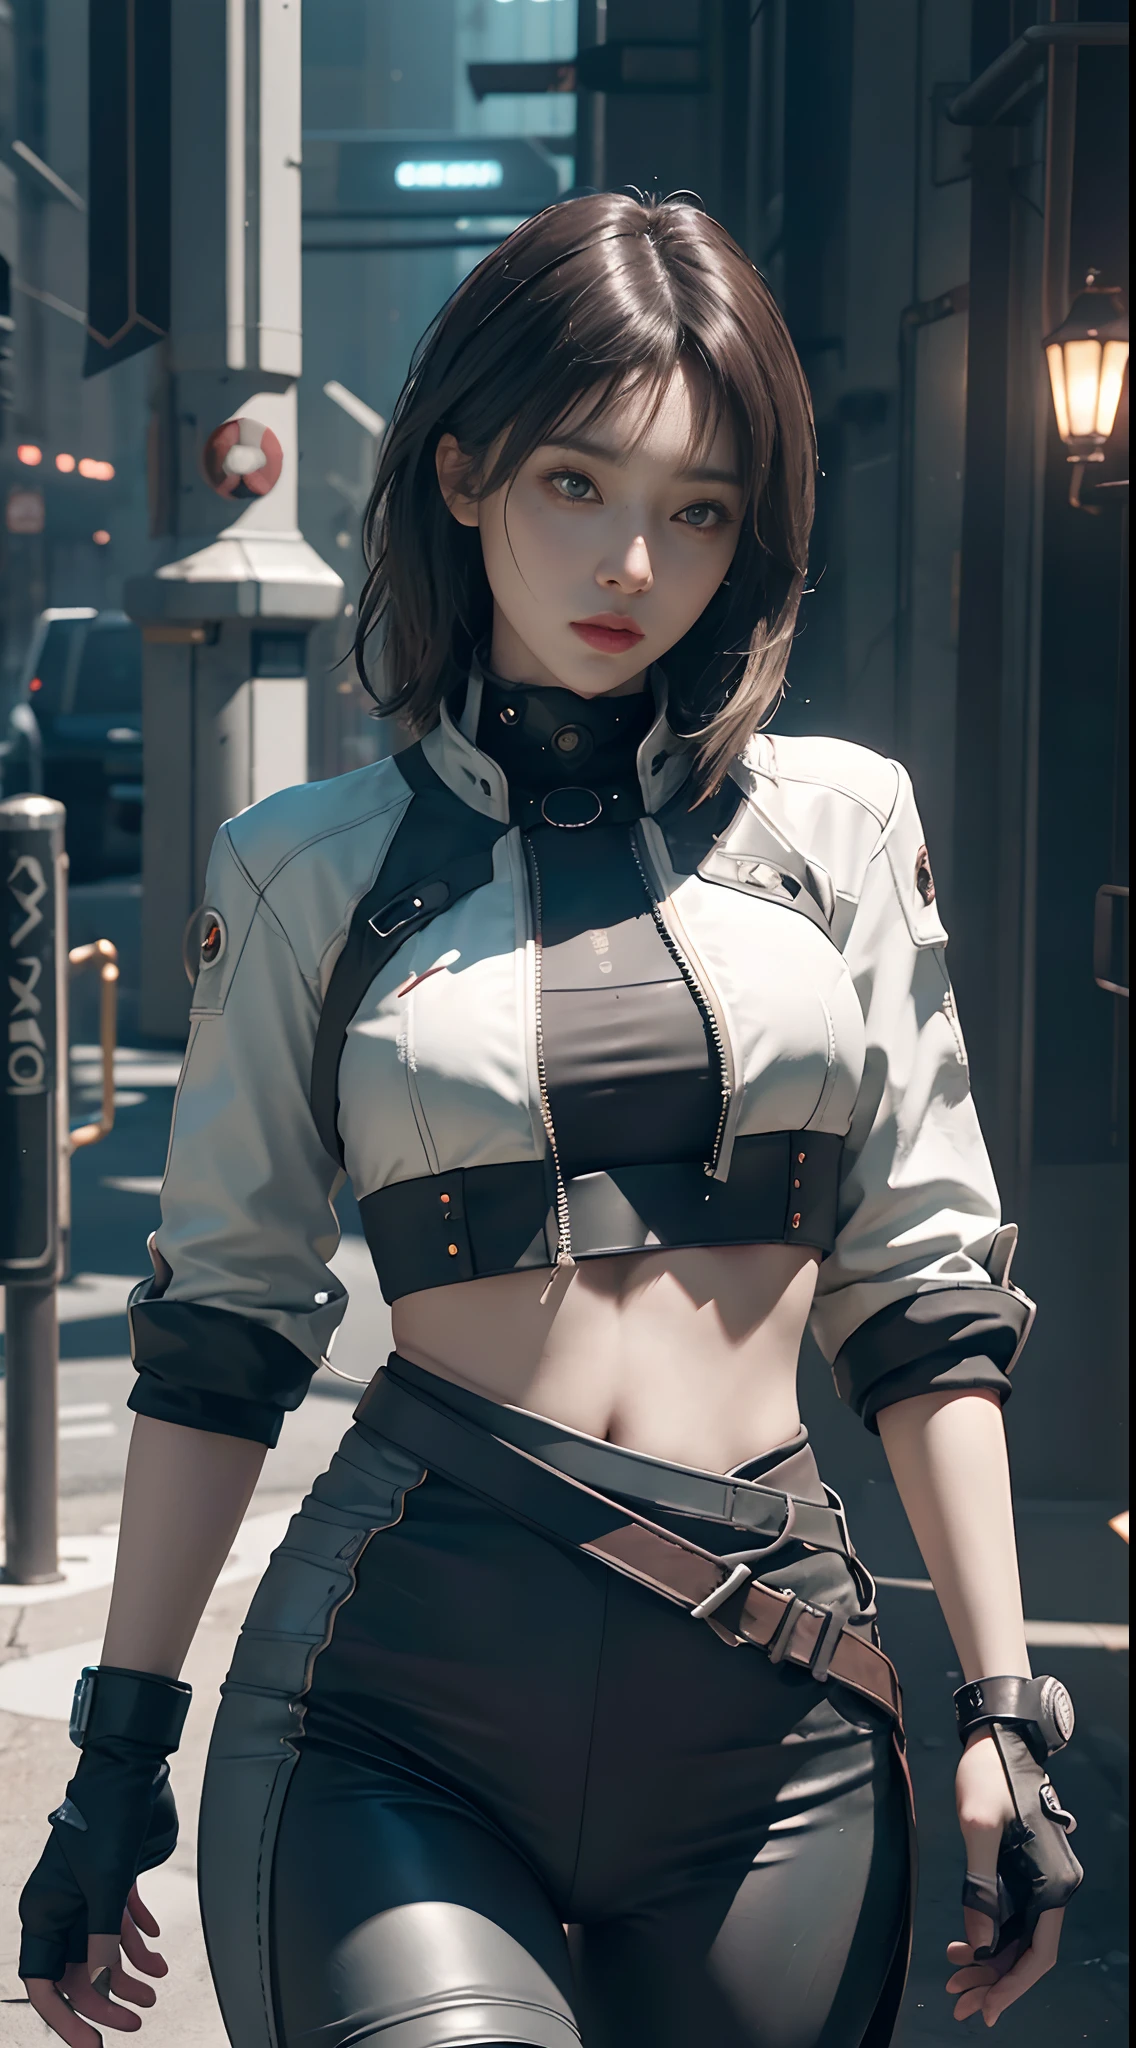 ((Best quality)), ((masterpiece)), (detailed:1.4), 3D, an image of a beautiful cyberpunk female,HDR (High Dynamic Range),Ray Tracing,NVIDIA RTX,Super-Resolution,Unreal 5,Subsurface scattering,PBR Texturing,Post-processing,Anisotropic Filtering,Depth-of-field,Maximum clarity and sharpness,Multi-layered textures,Albedo and Specular maps,Surface shading,Accurate simulation of light-material interaction,Perfect proportions,Octane Render,Two-tone lighting,Wide aperture,Low ISO,White balance,Rule of thirds,8K RAW,